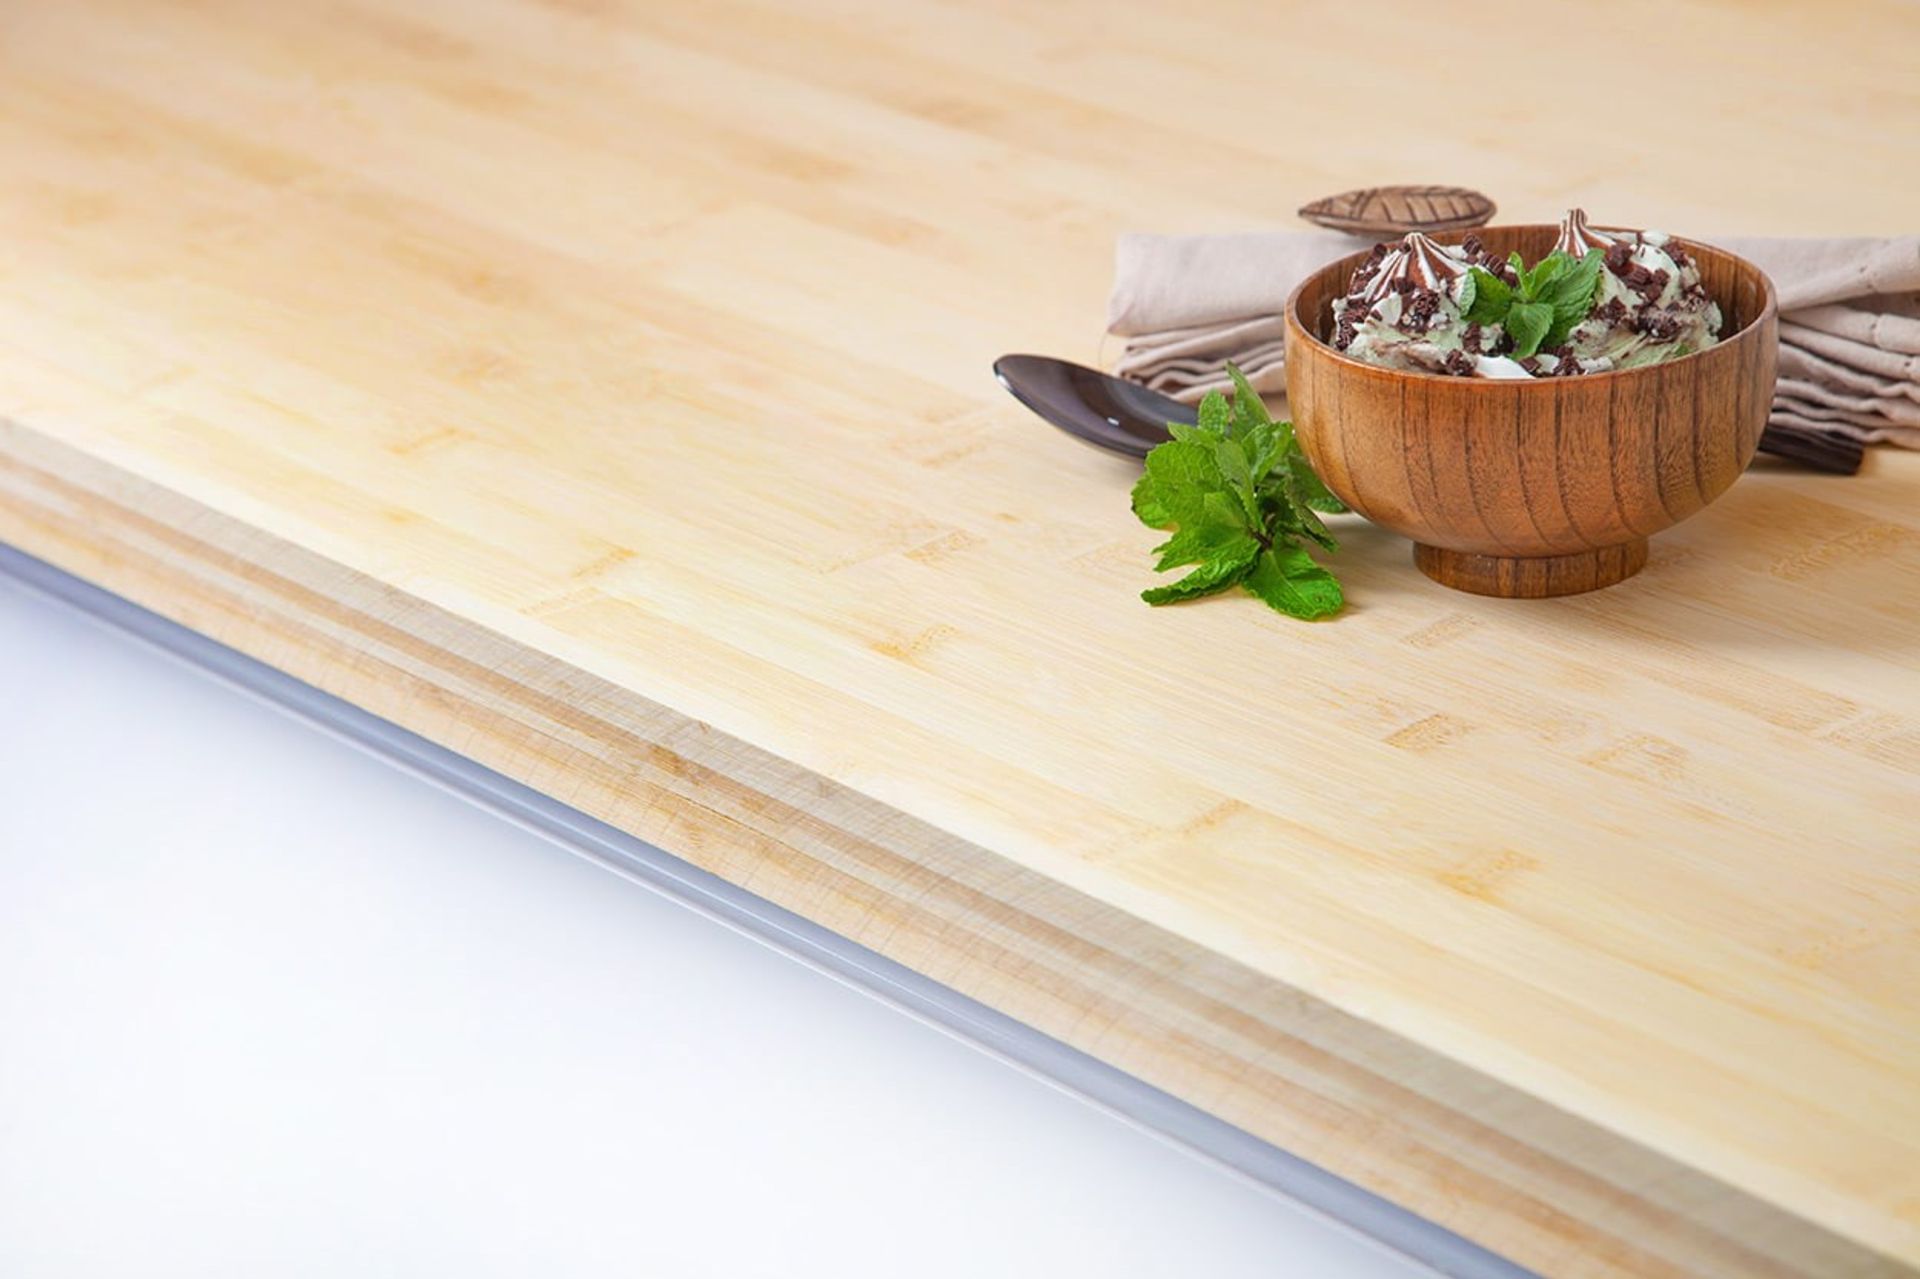 1 x Layered Solid Bamboo Wood Worktop - Size: 3000 x 650 x 40mm - Ideal For Kitchens, Countertops, - Image 4 of 5